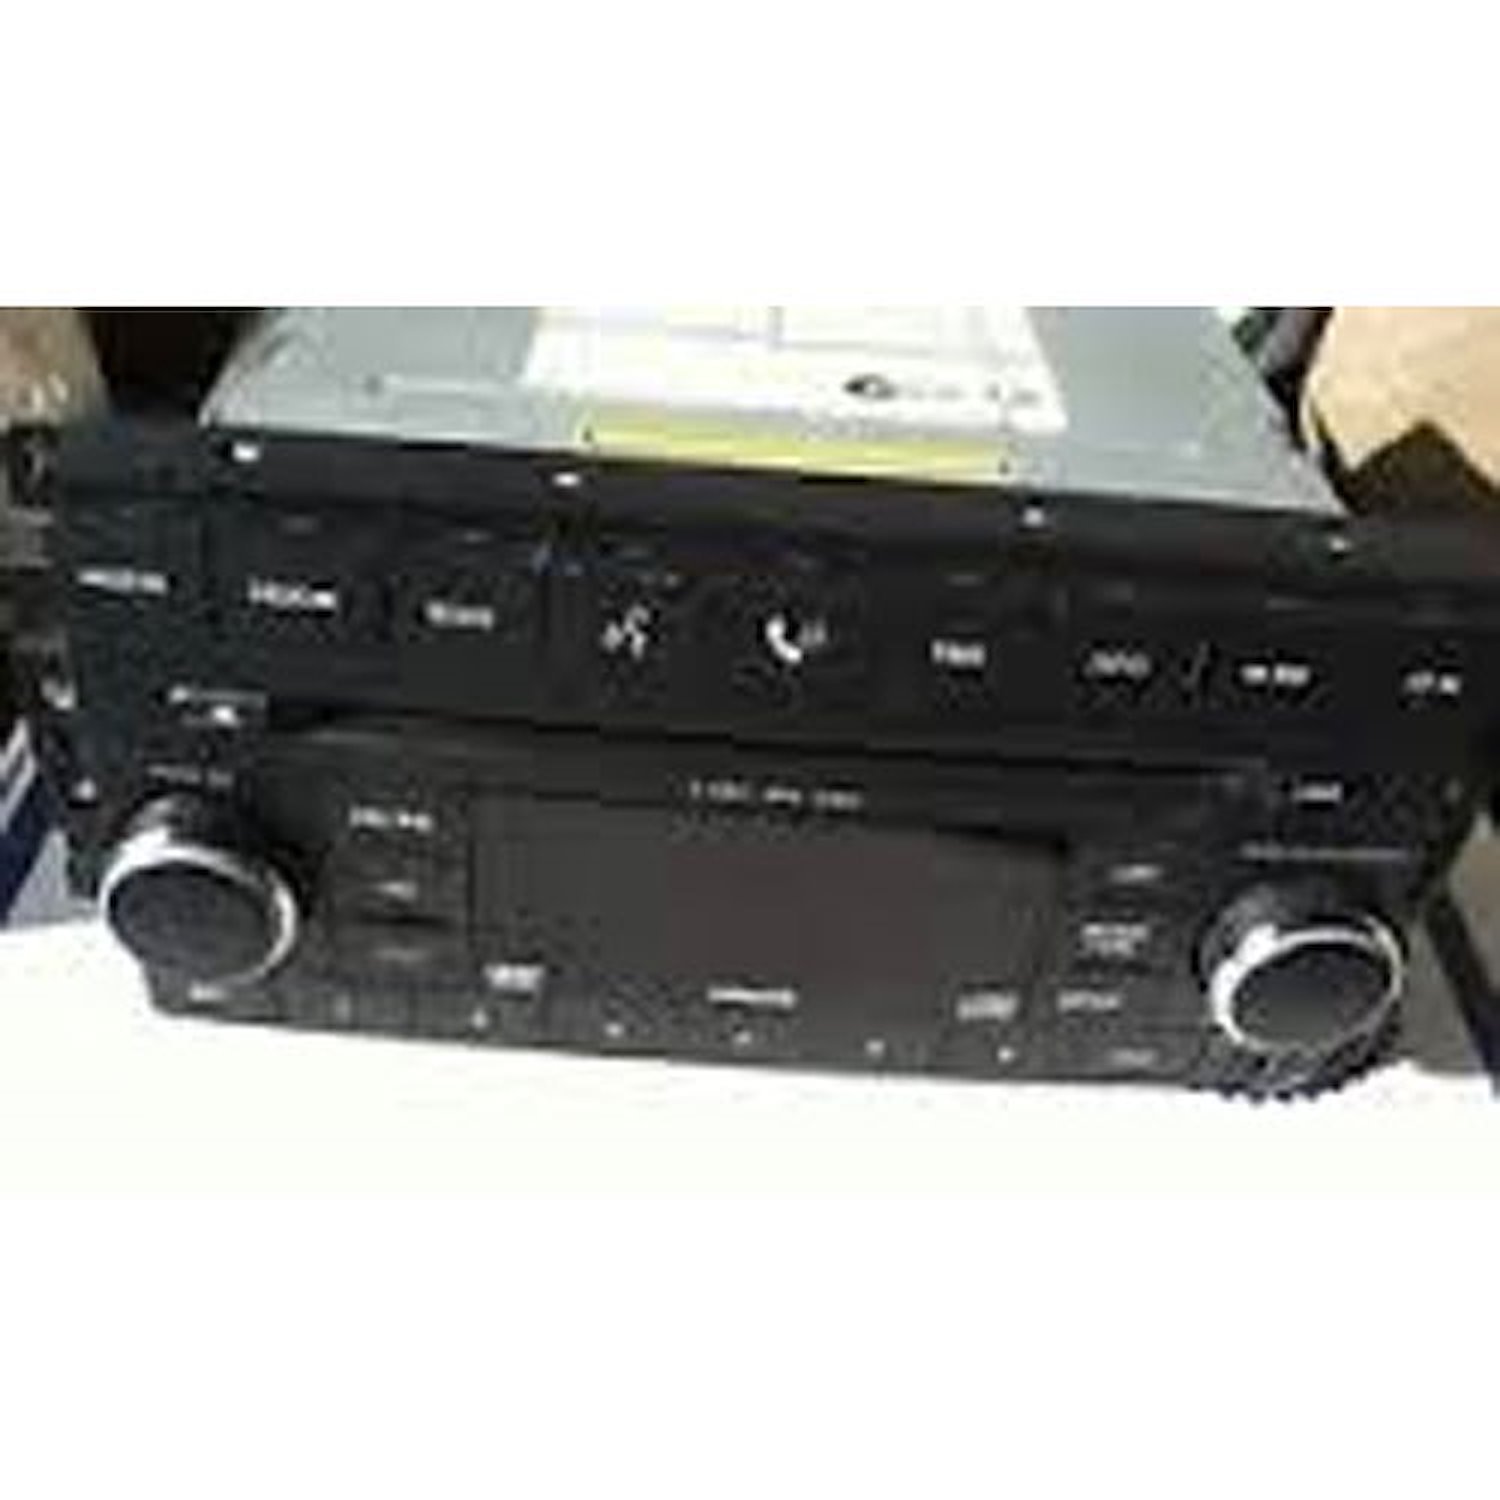 REQ AM/FM Stereo with 6-Disc CD/DVD Player & Satellite Radio Receiver Chrysler/Dodge/Jeep